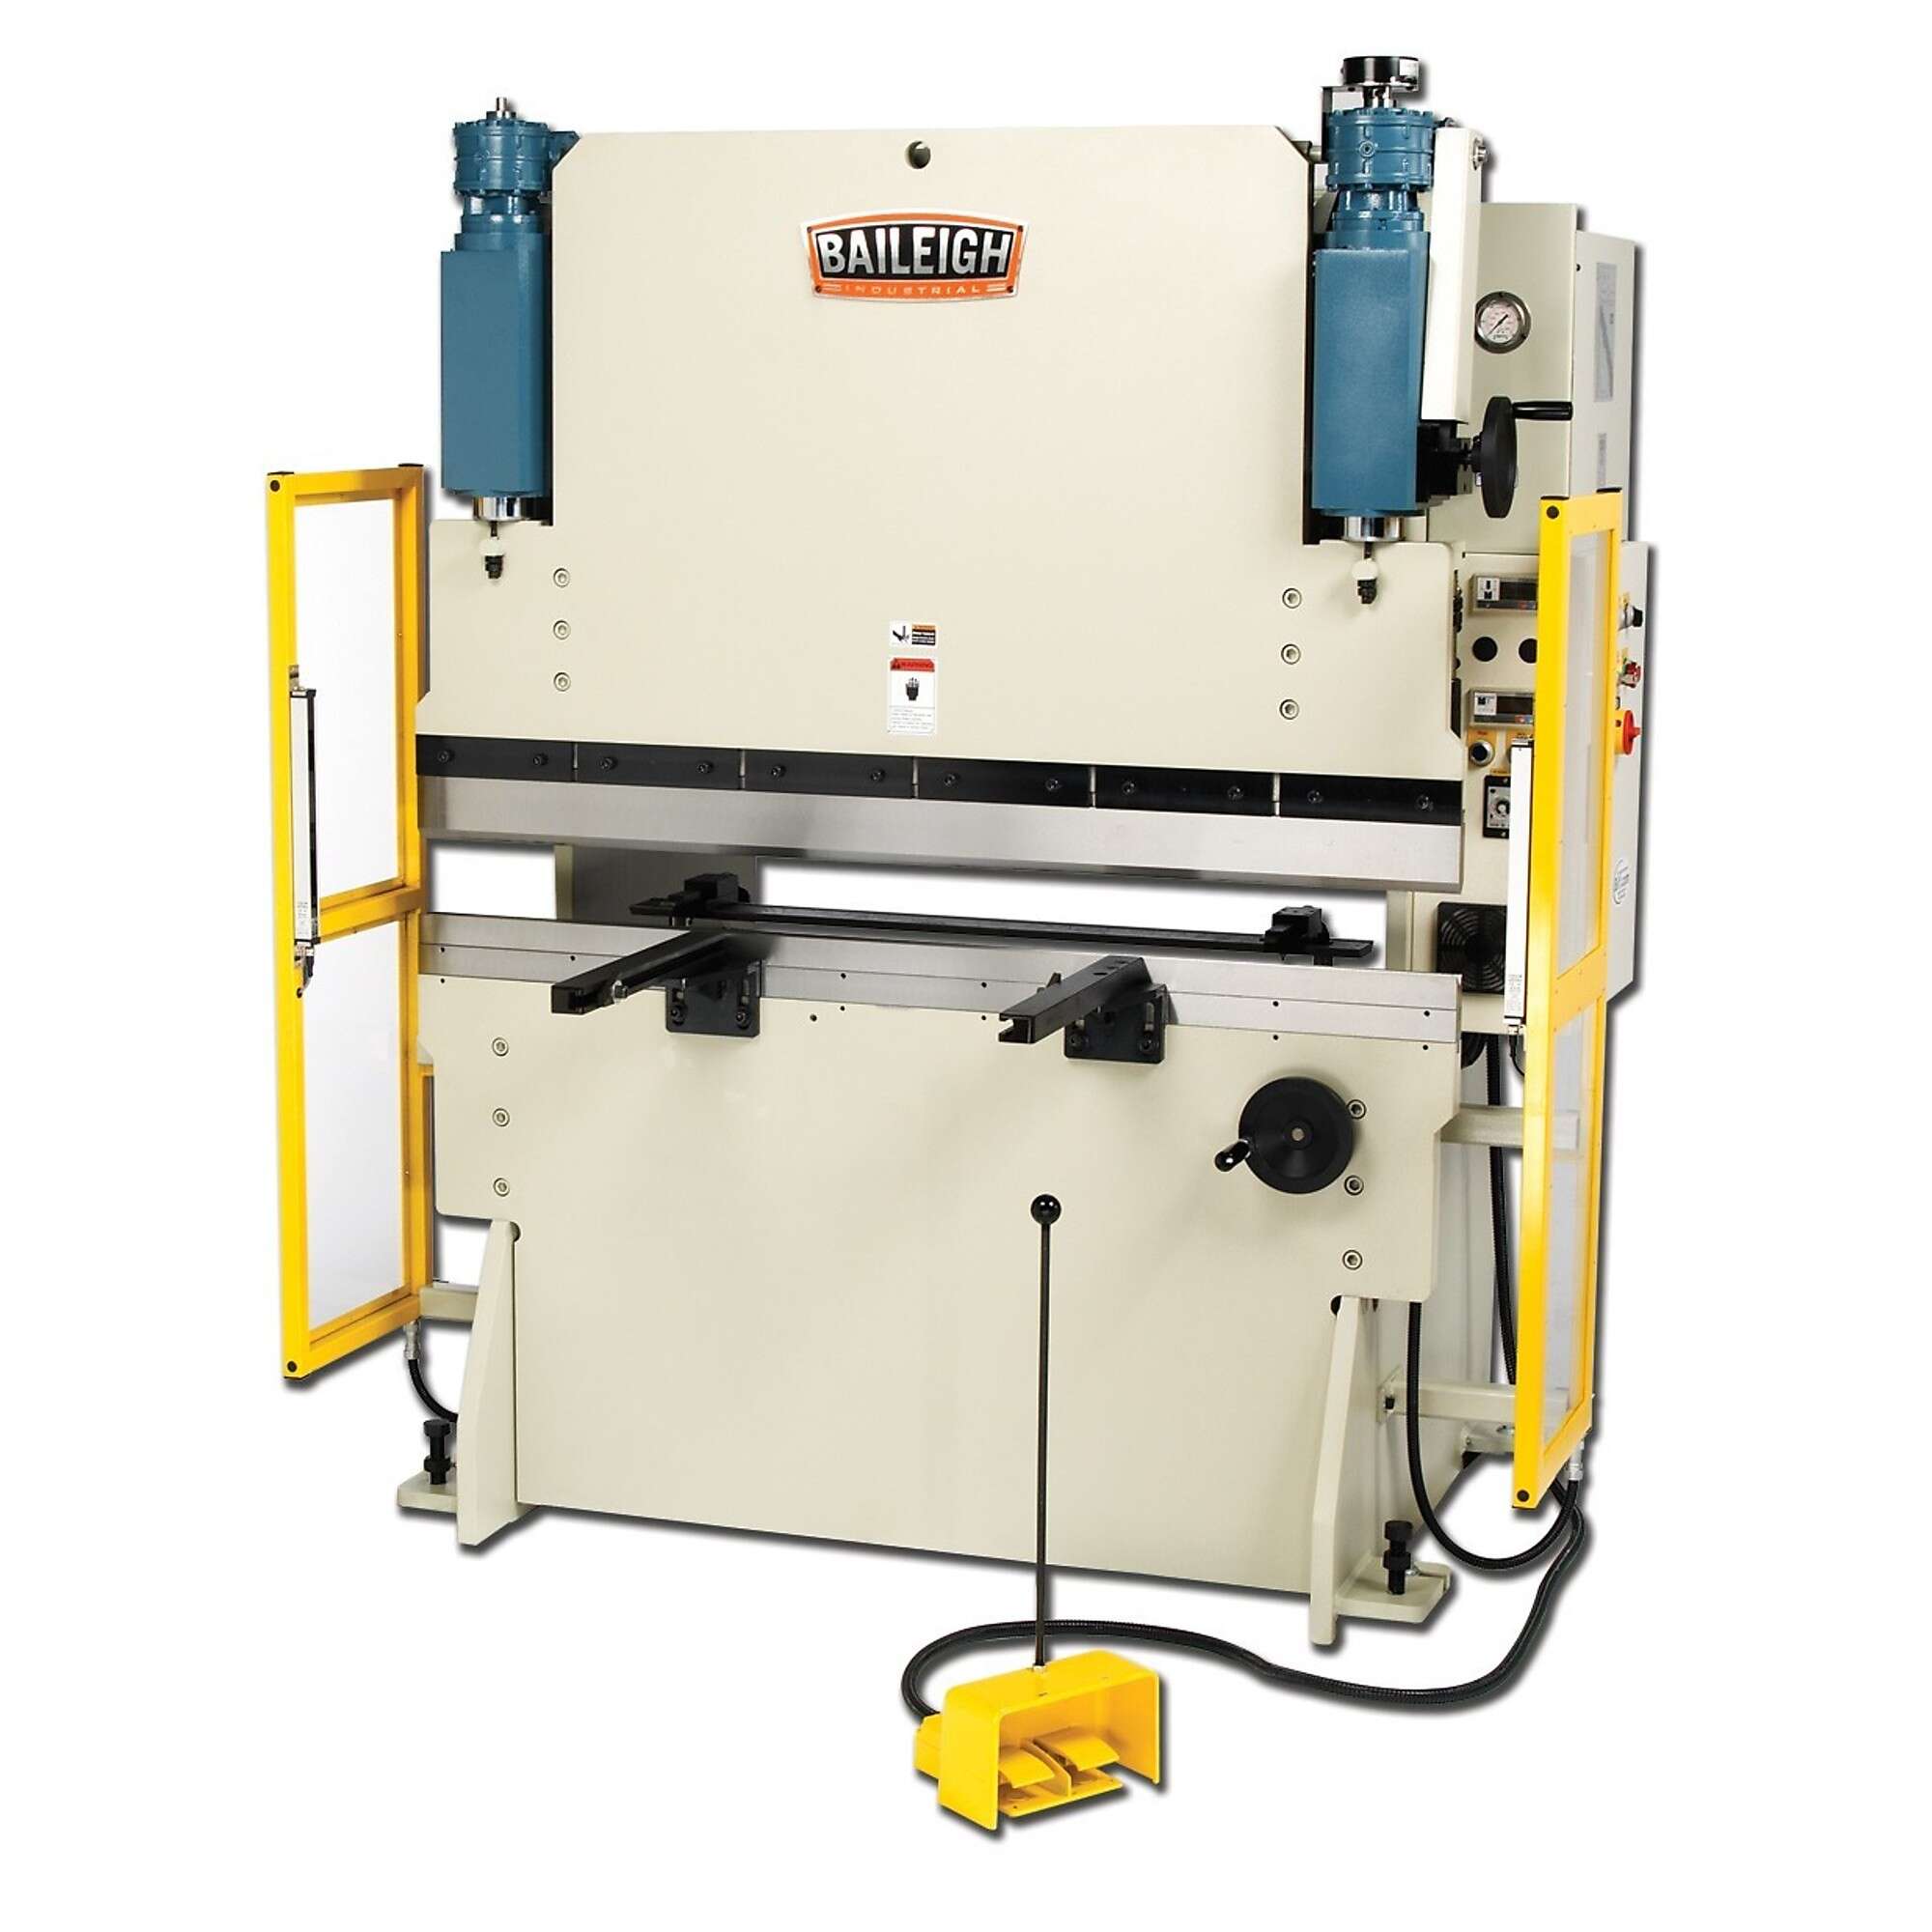 Baileigh 220V 3Phase 33 Ton Hydraulic Press Brake Distance Max Material Gauge 3 Max Depth 195 in Max Lift Height 984 in